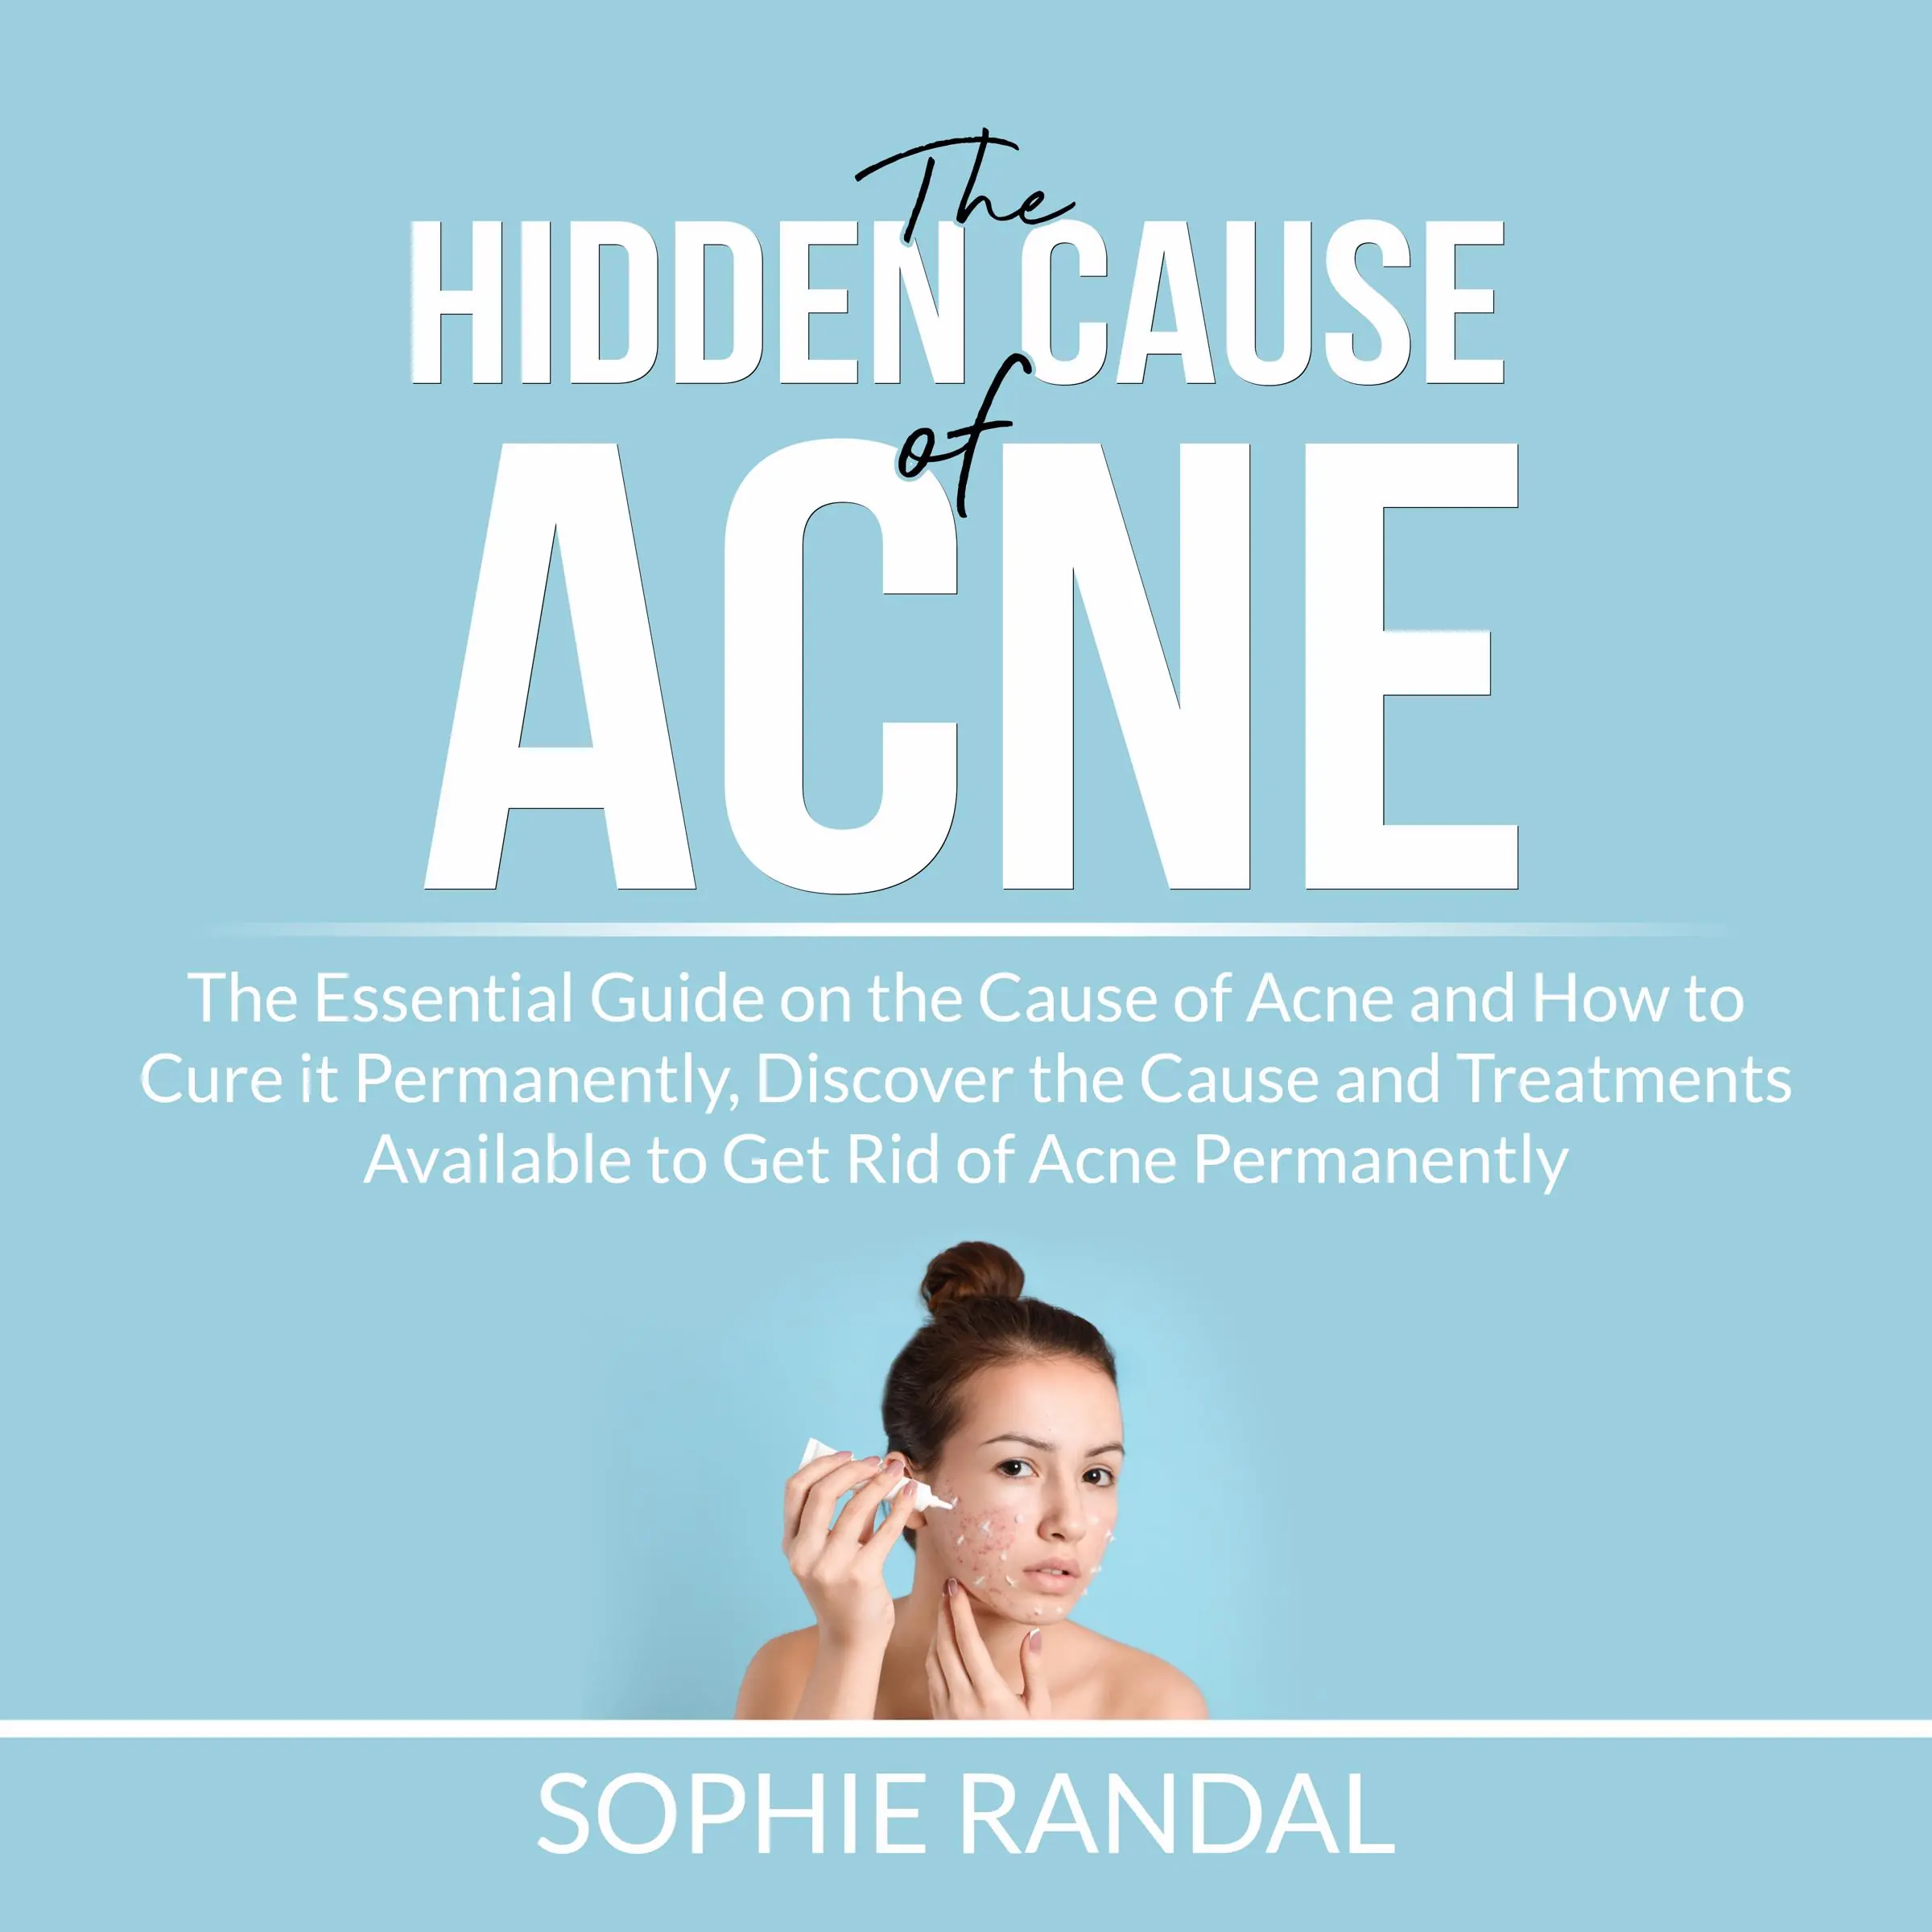 The Hidden Cause of Acne: the Essential Guide on the Cause of Acne and How to Cure it Permanently, Discover the Cause and Treatments Available to Get Rid of Acne Permanently Audiobook by Sophie Randal